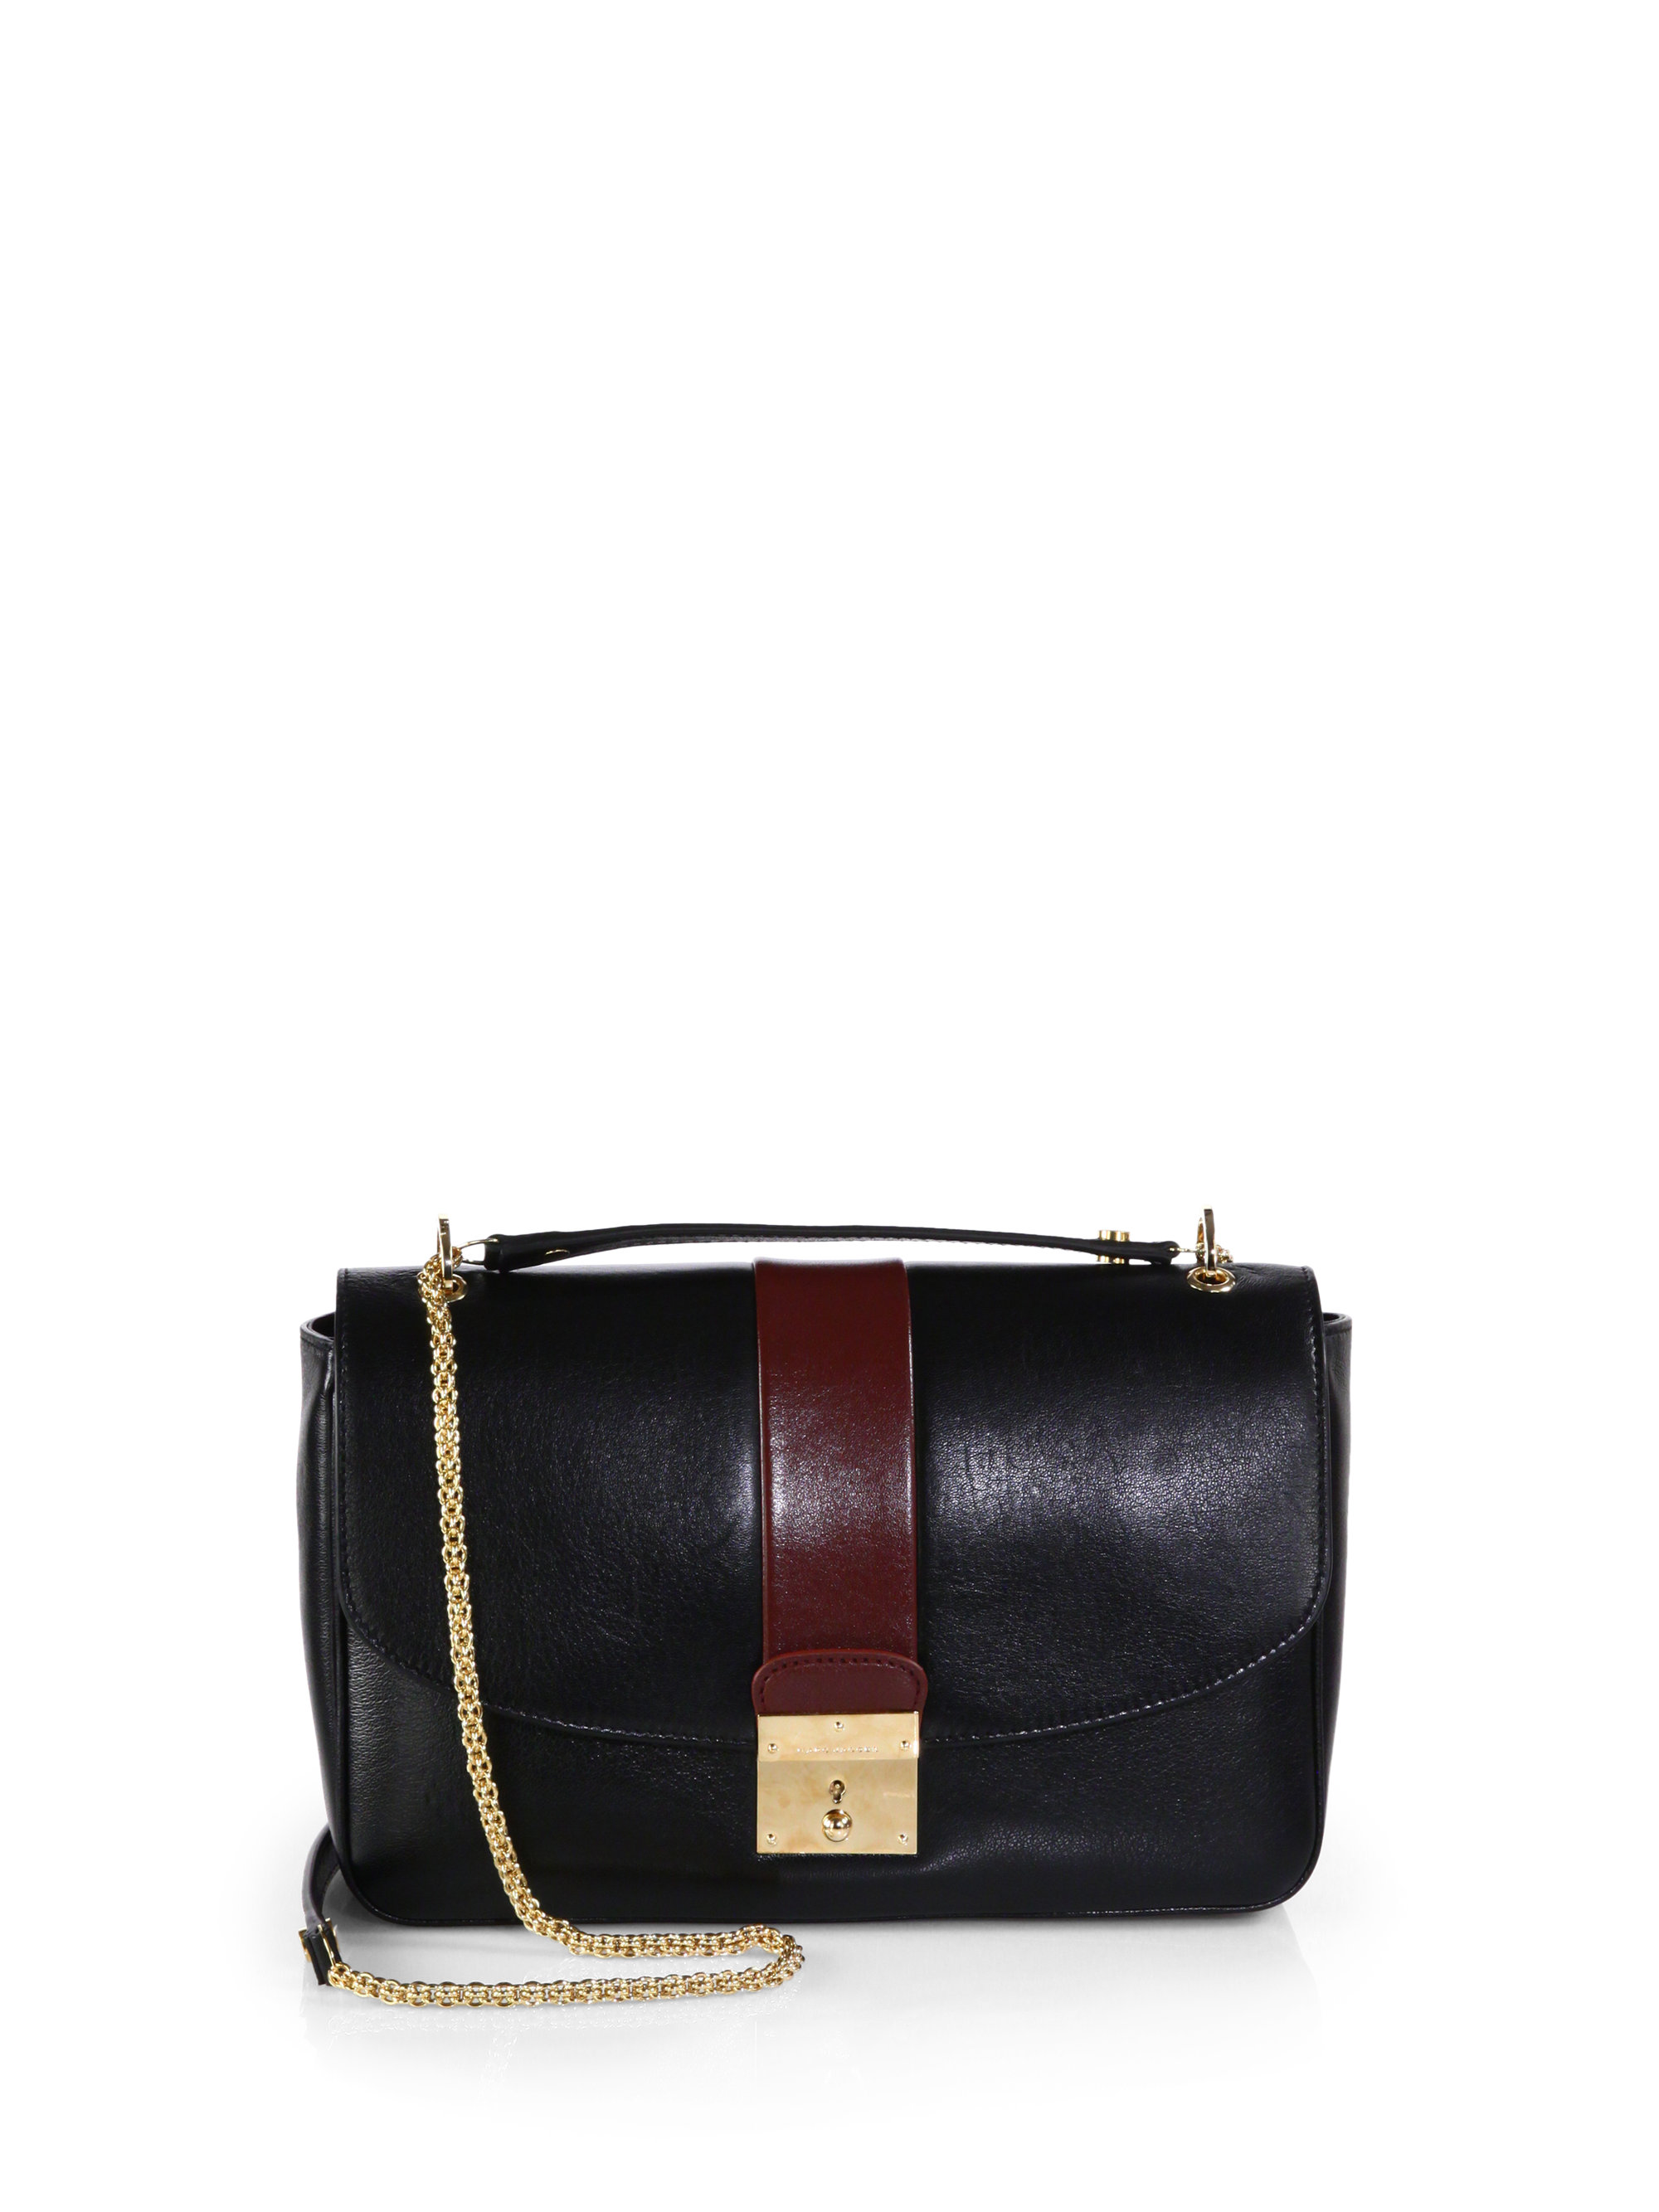 Marc Jacobs Checkers Polly Leather Shoulder Bag in Black (BLACK ...